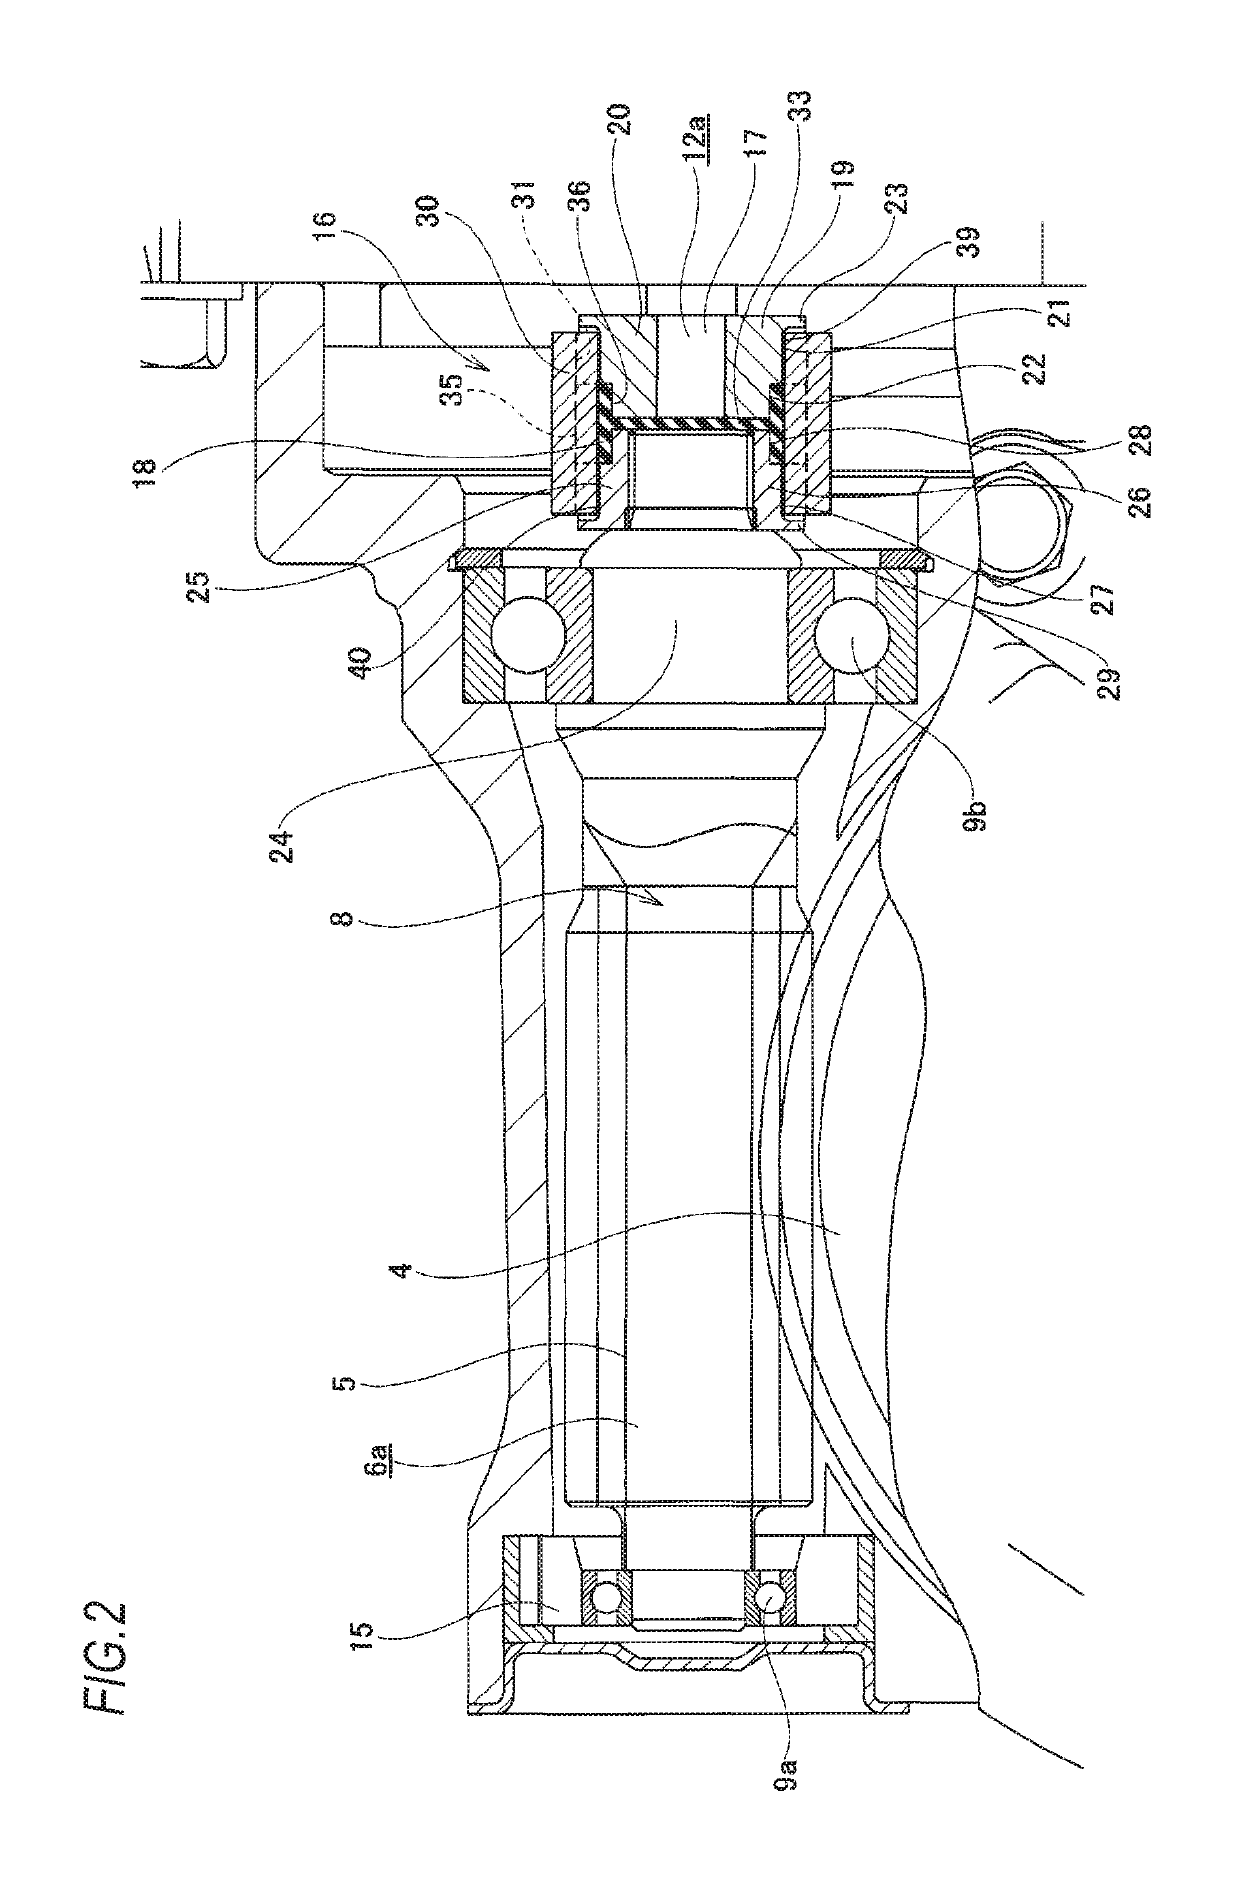 Torque transmission joint and electric power steering device